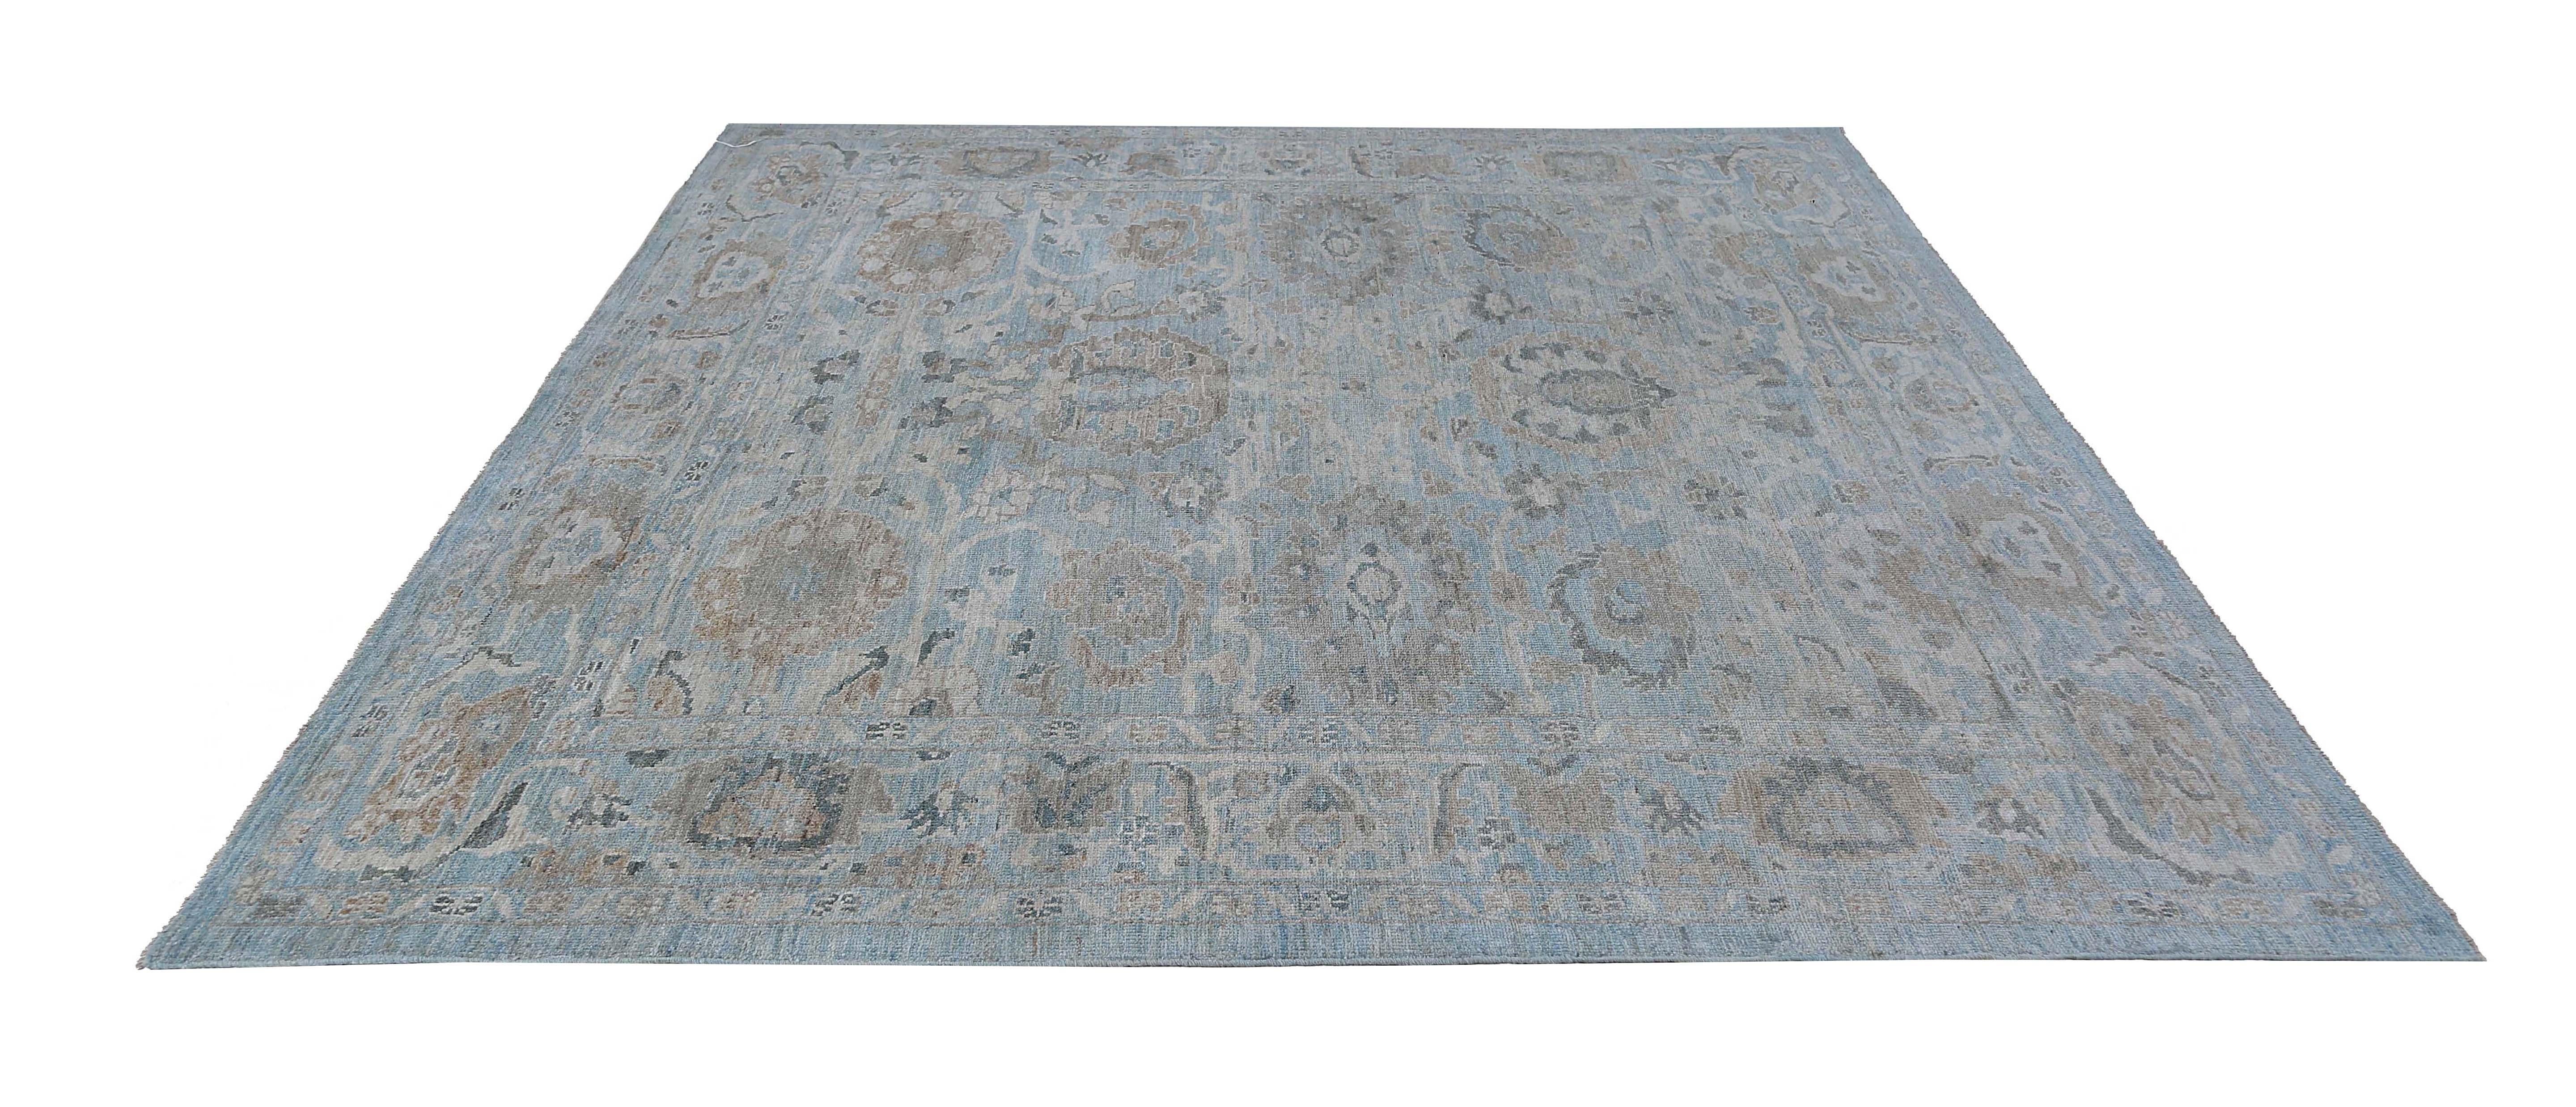 Introducing our luxurious 8'4'' x 8'6'' Sultanabad rug, handwoven from premium quality wool to provide a soft and comfortable underfoot experience. The rug's intricate design features a dark blue background with a stunning blend of floral and